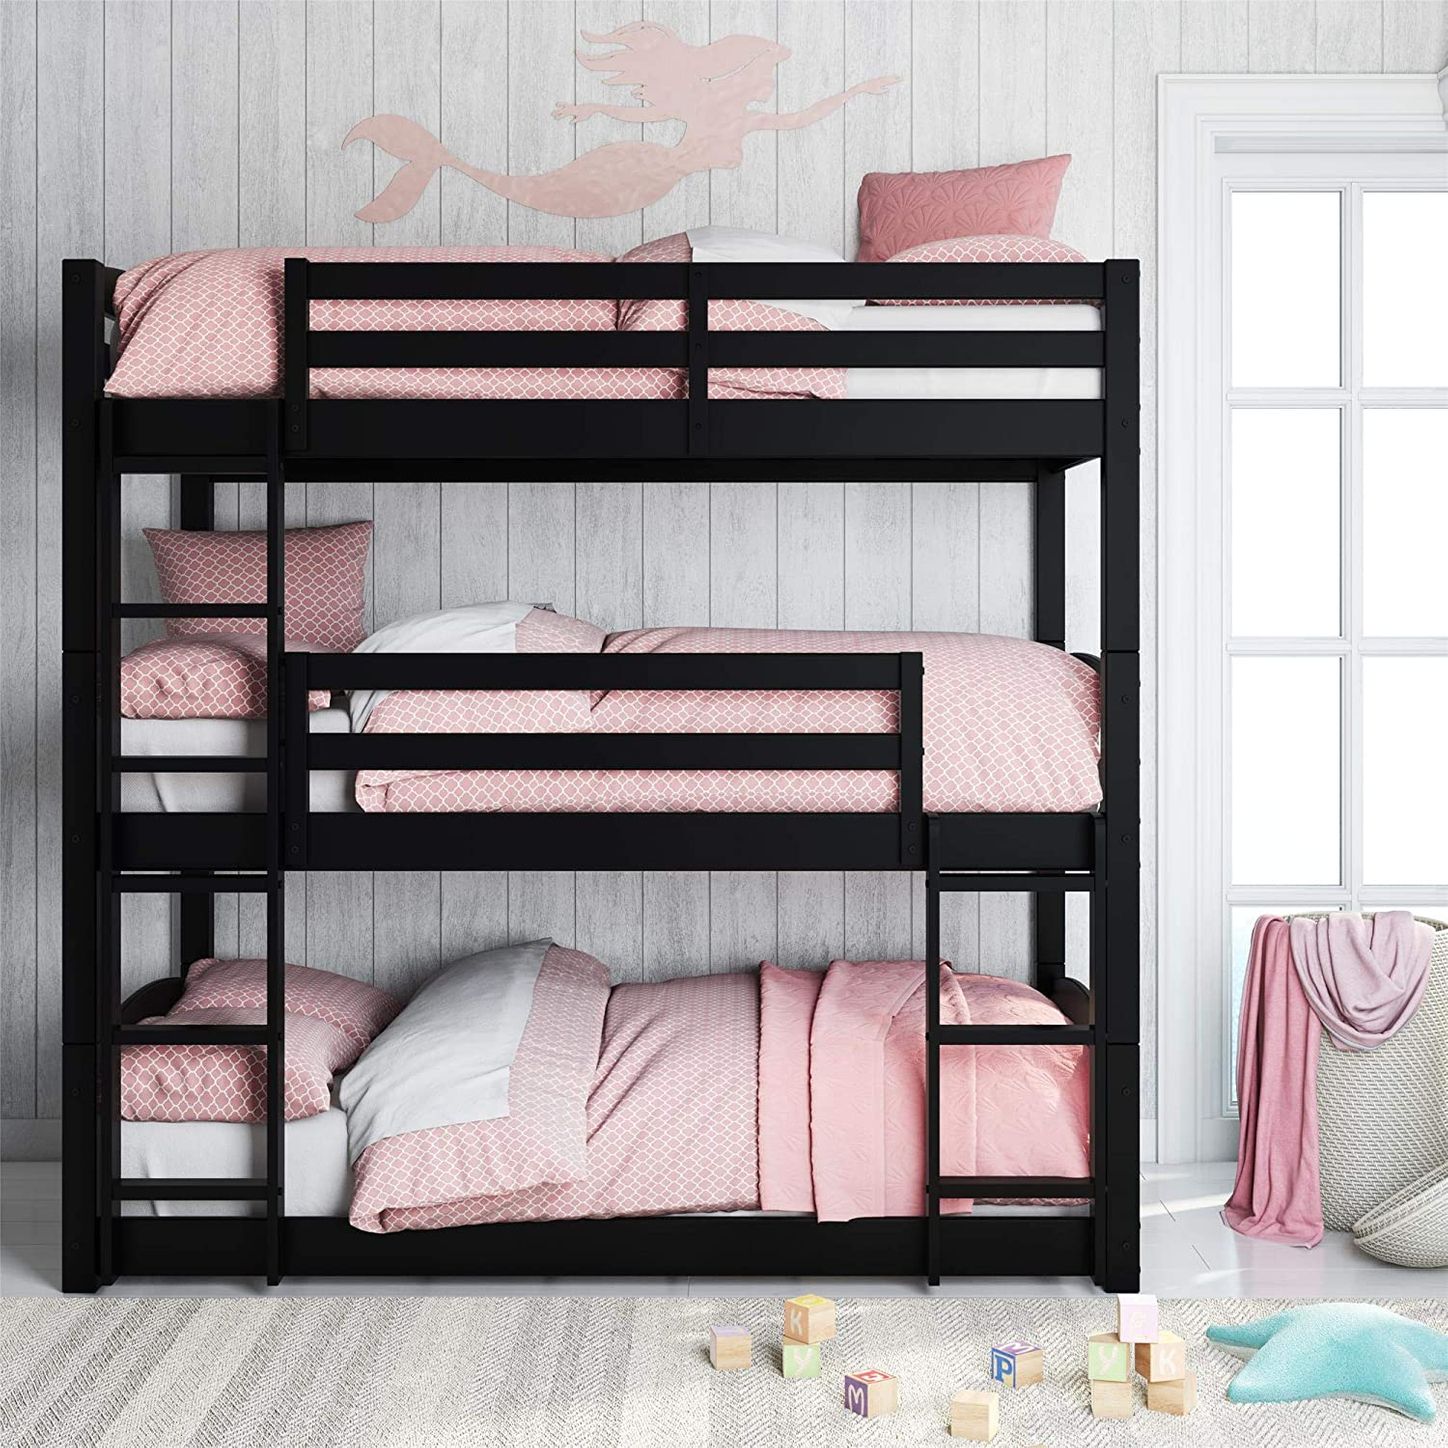 8 Best Bunk Beds 2020 The Strategist, Full Over Full Bunk Beds Rooms To Go